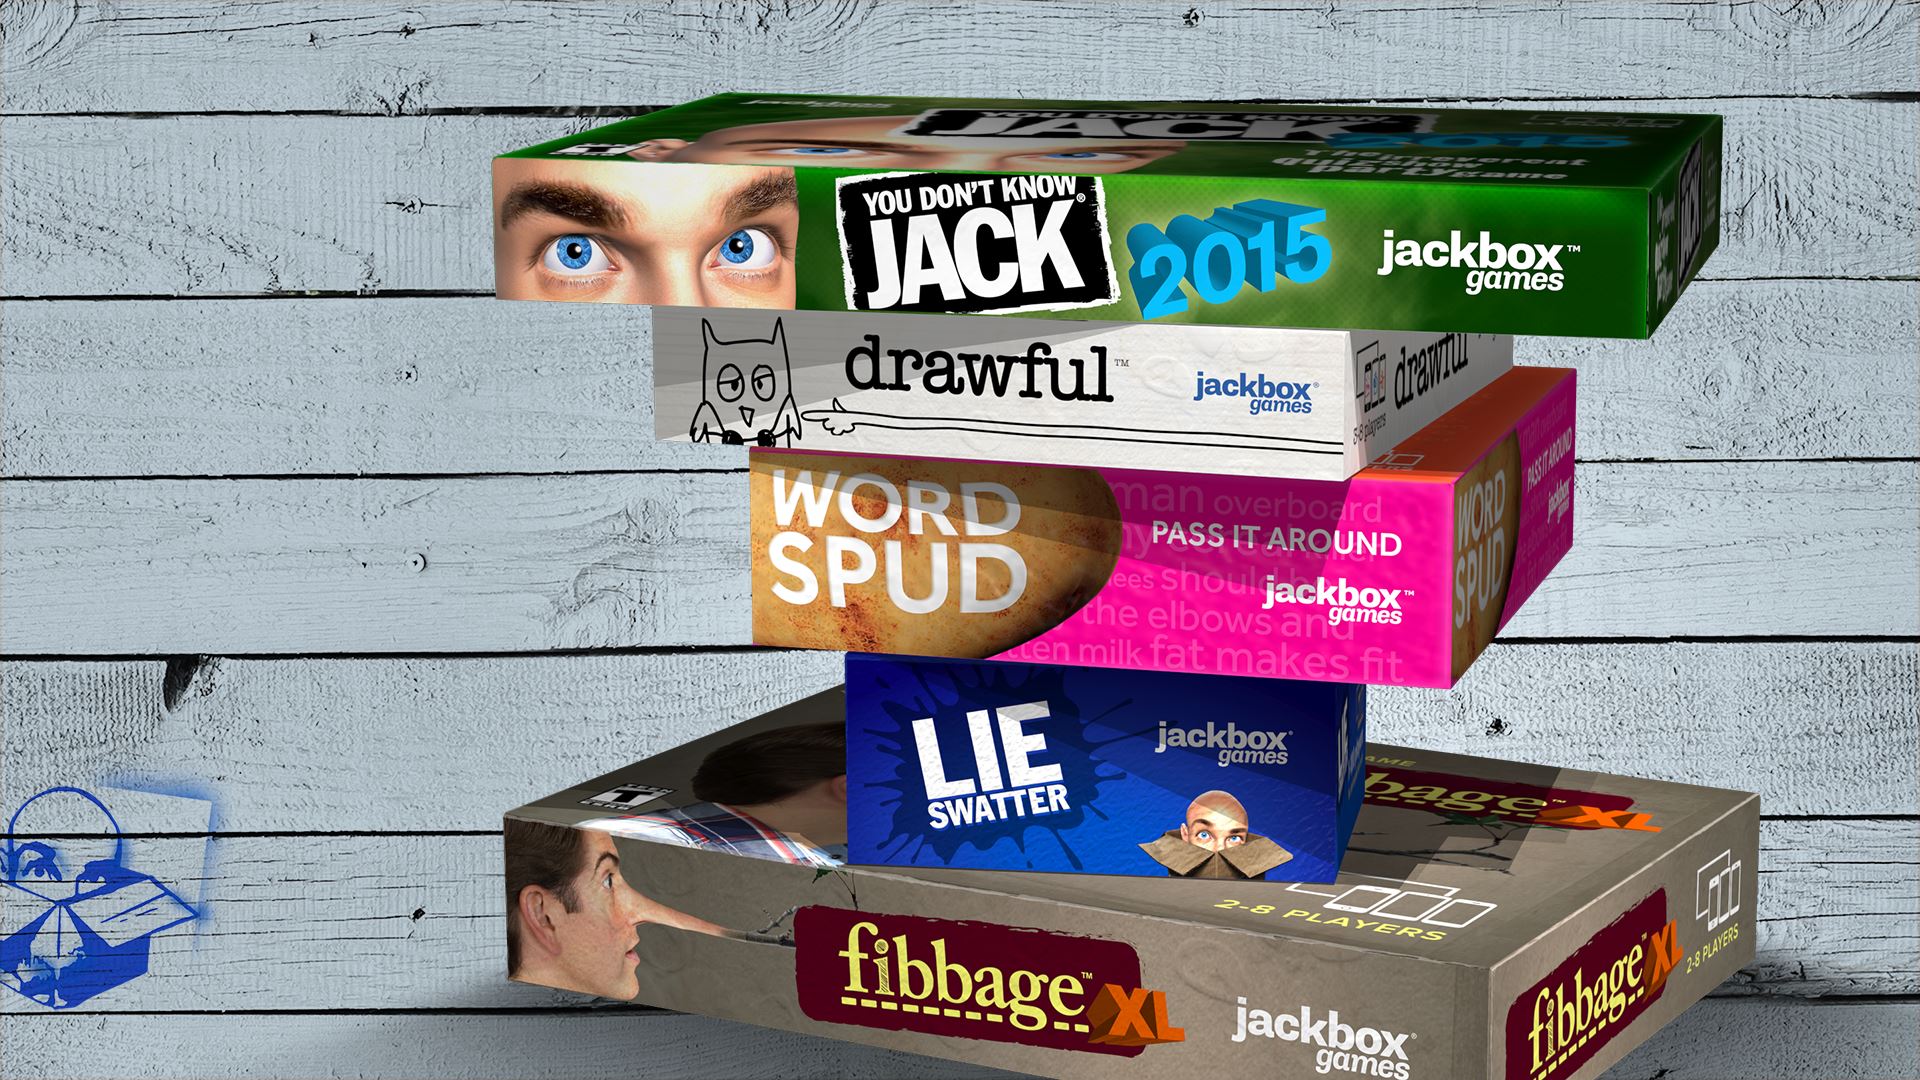 Jackbox Games - Play New Party Pack 10 Games for Free During Steam